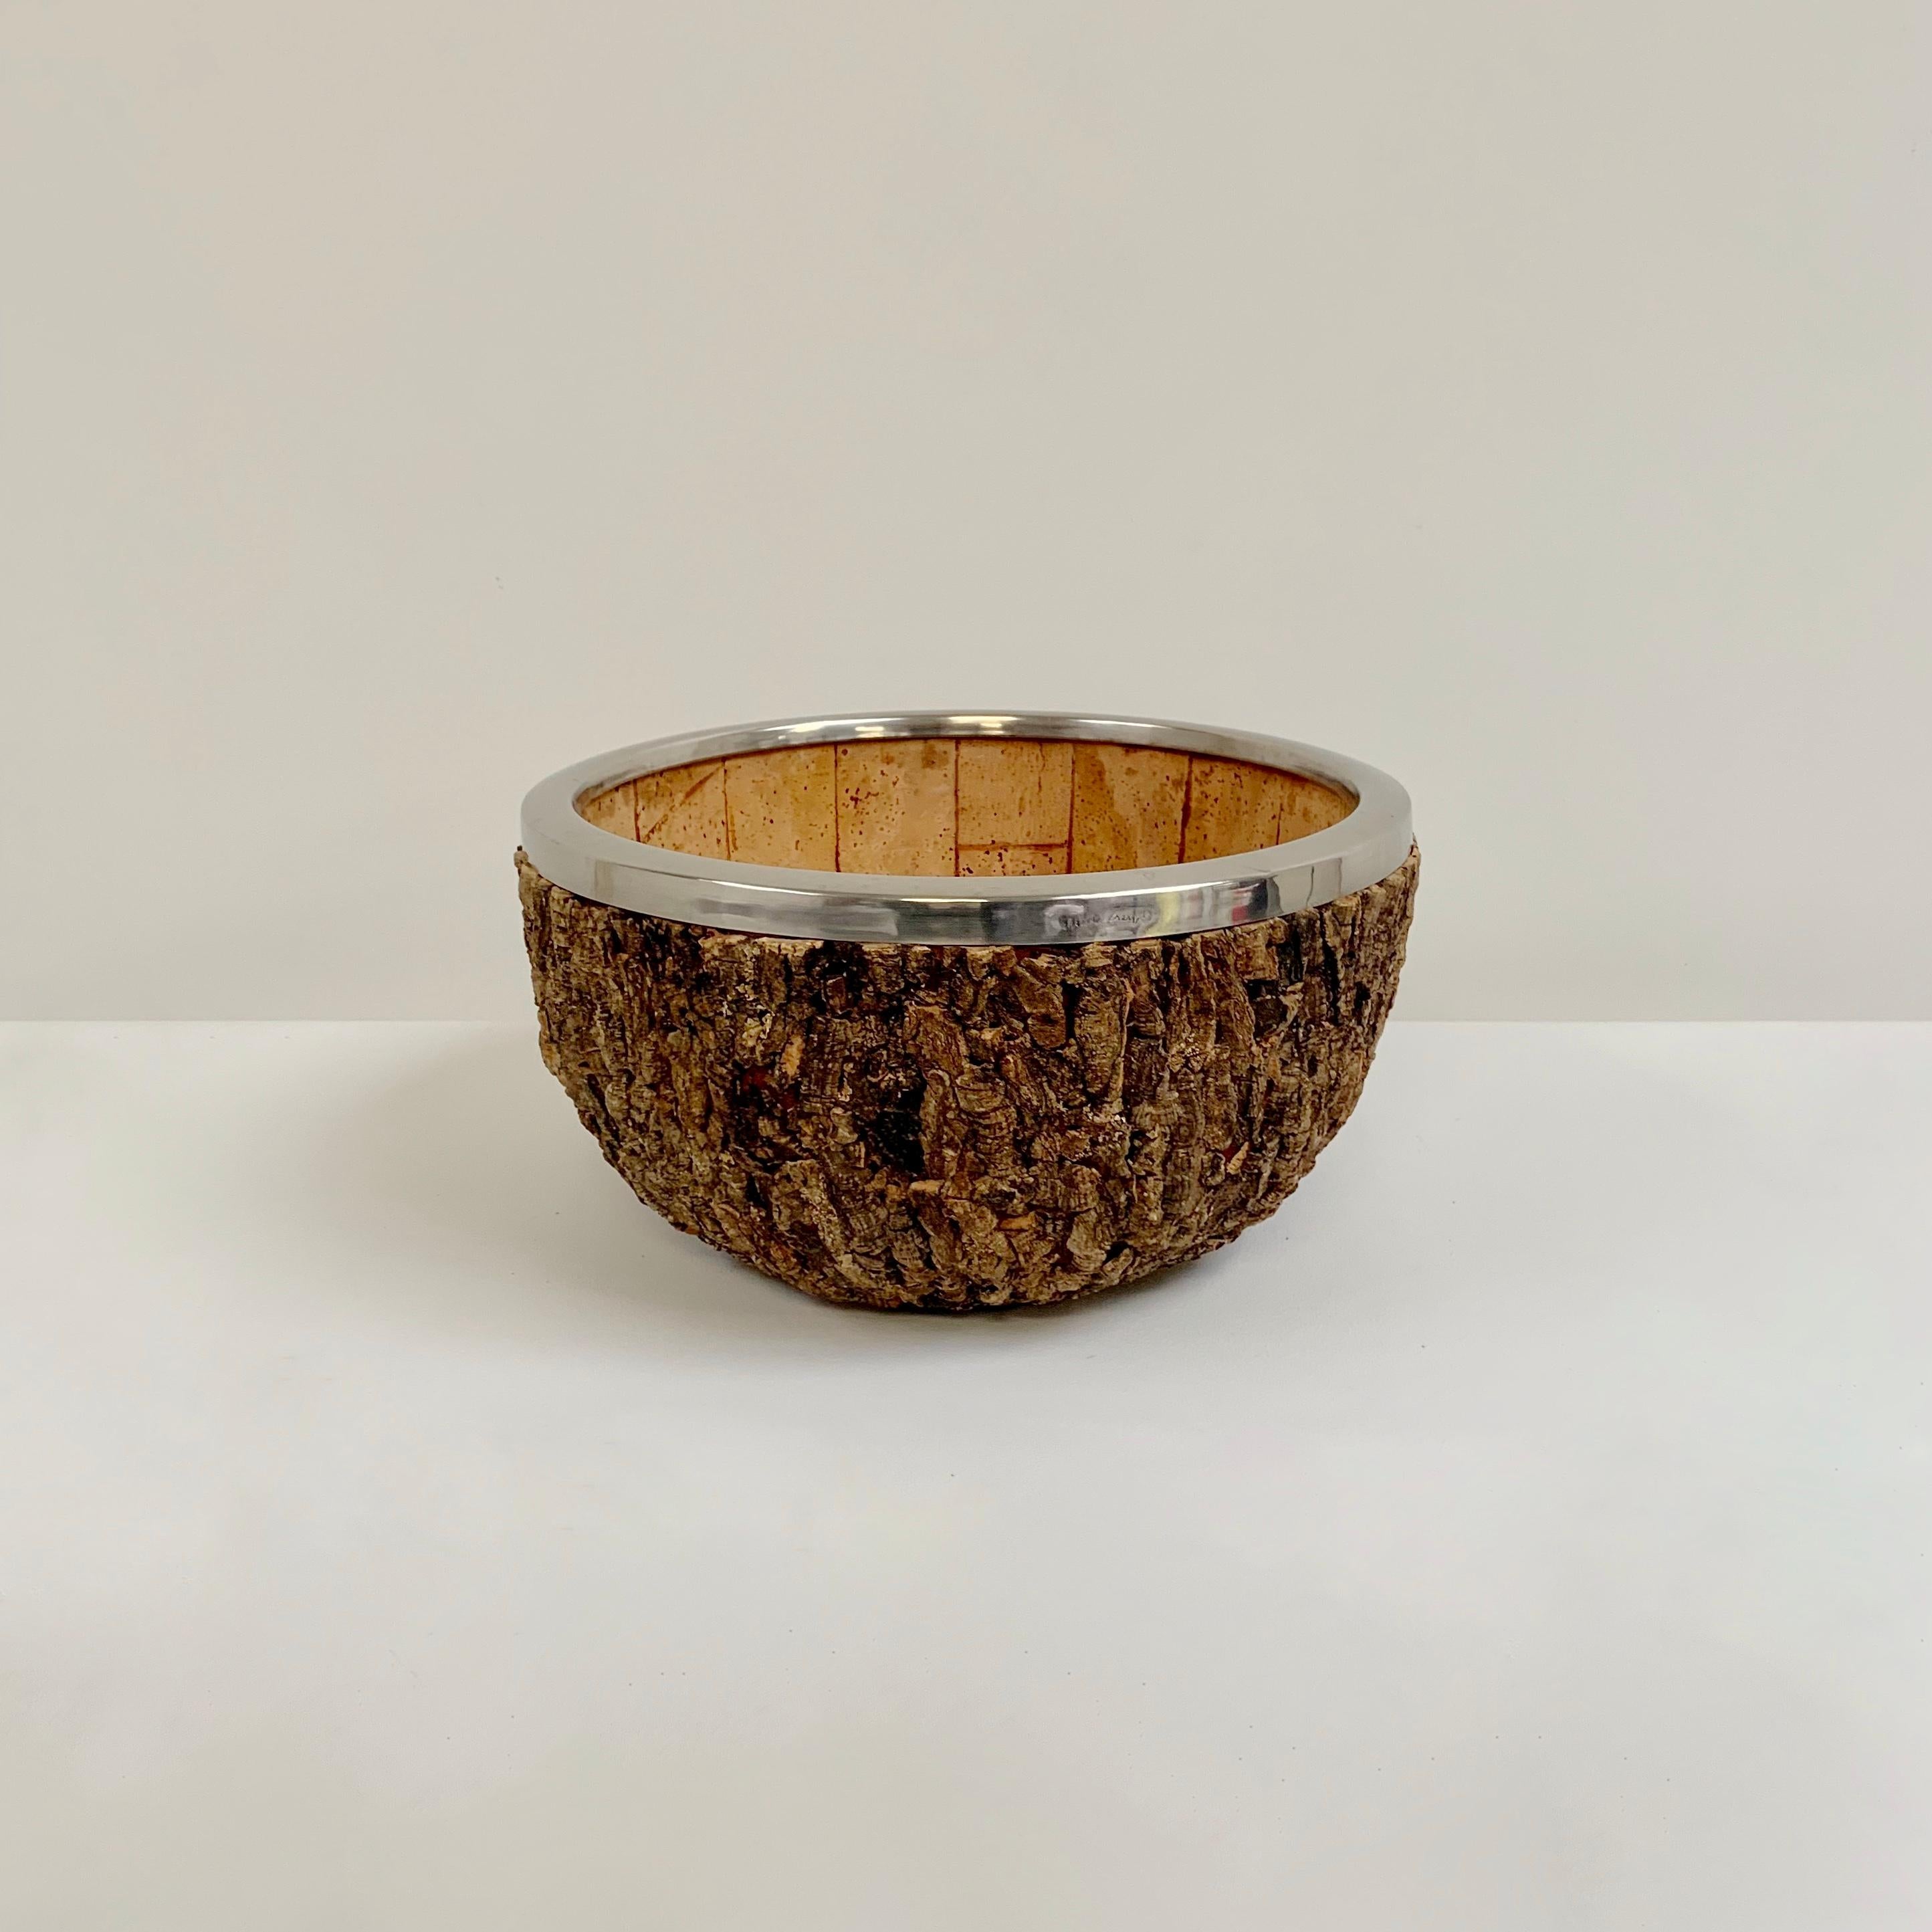 Gabrielle Crespi Signed Large Cork Bowl, circa 1974, Italy. For Sale 11